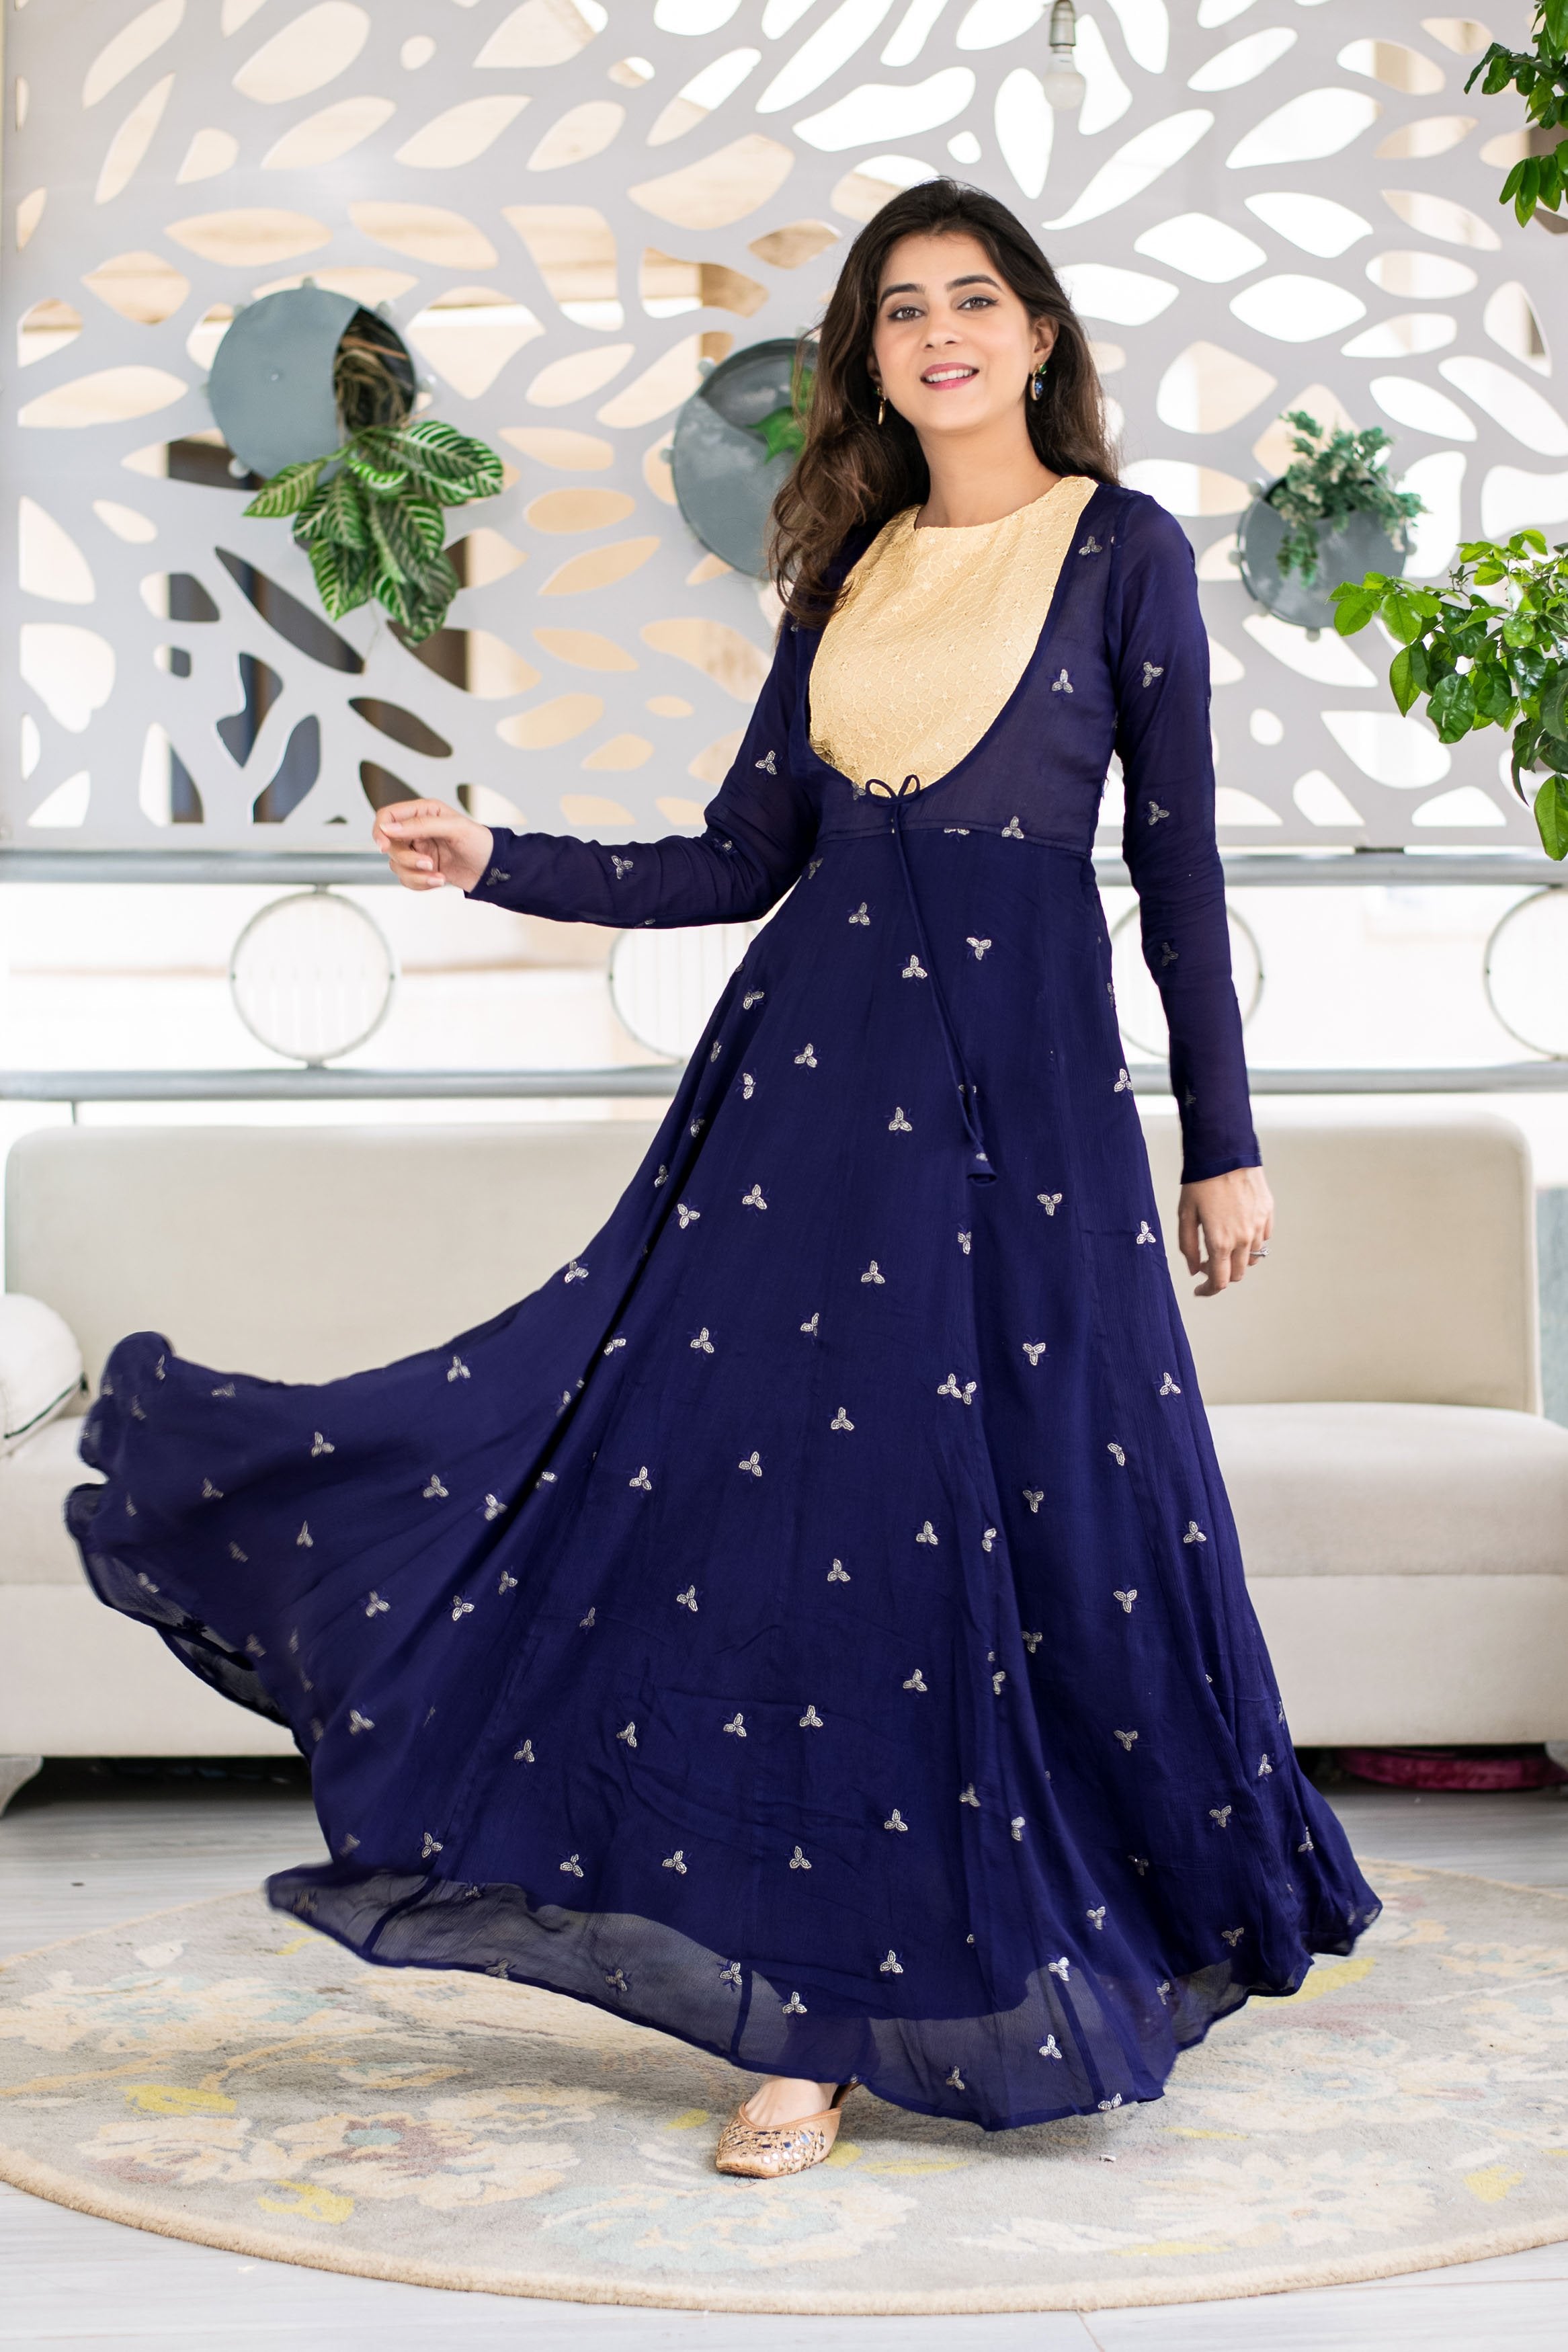 Women's Deep Blue and Beige Gown by Label Shaurya Sanadhya